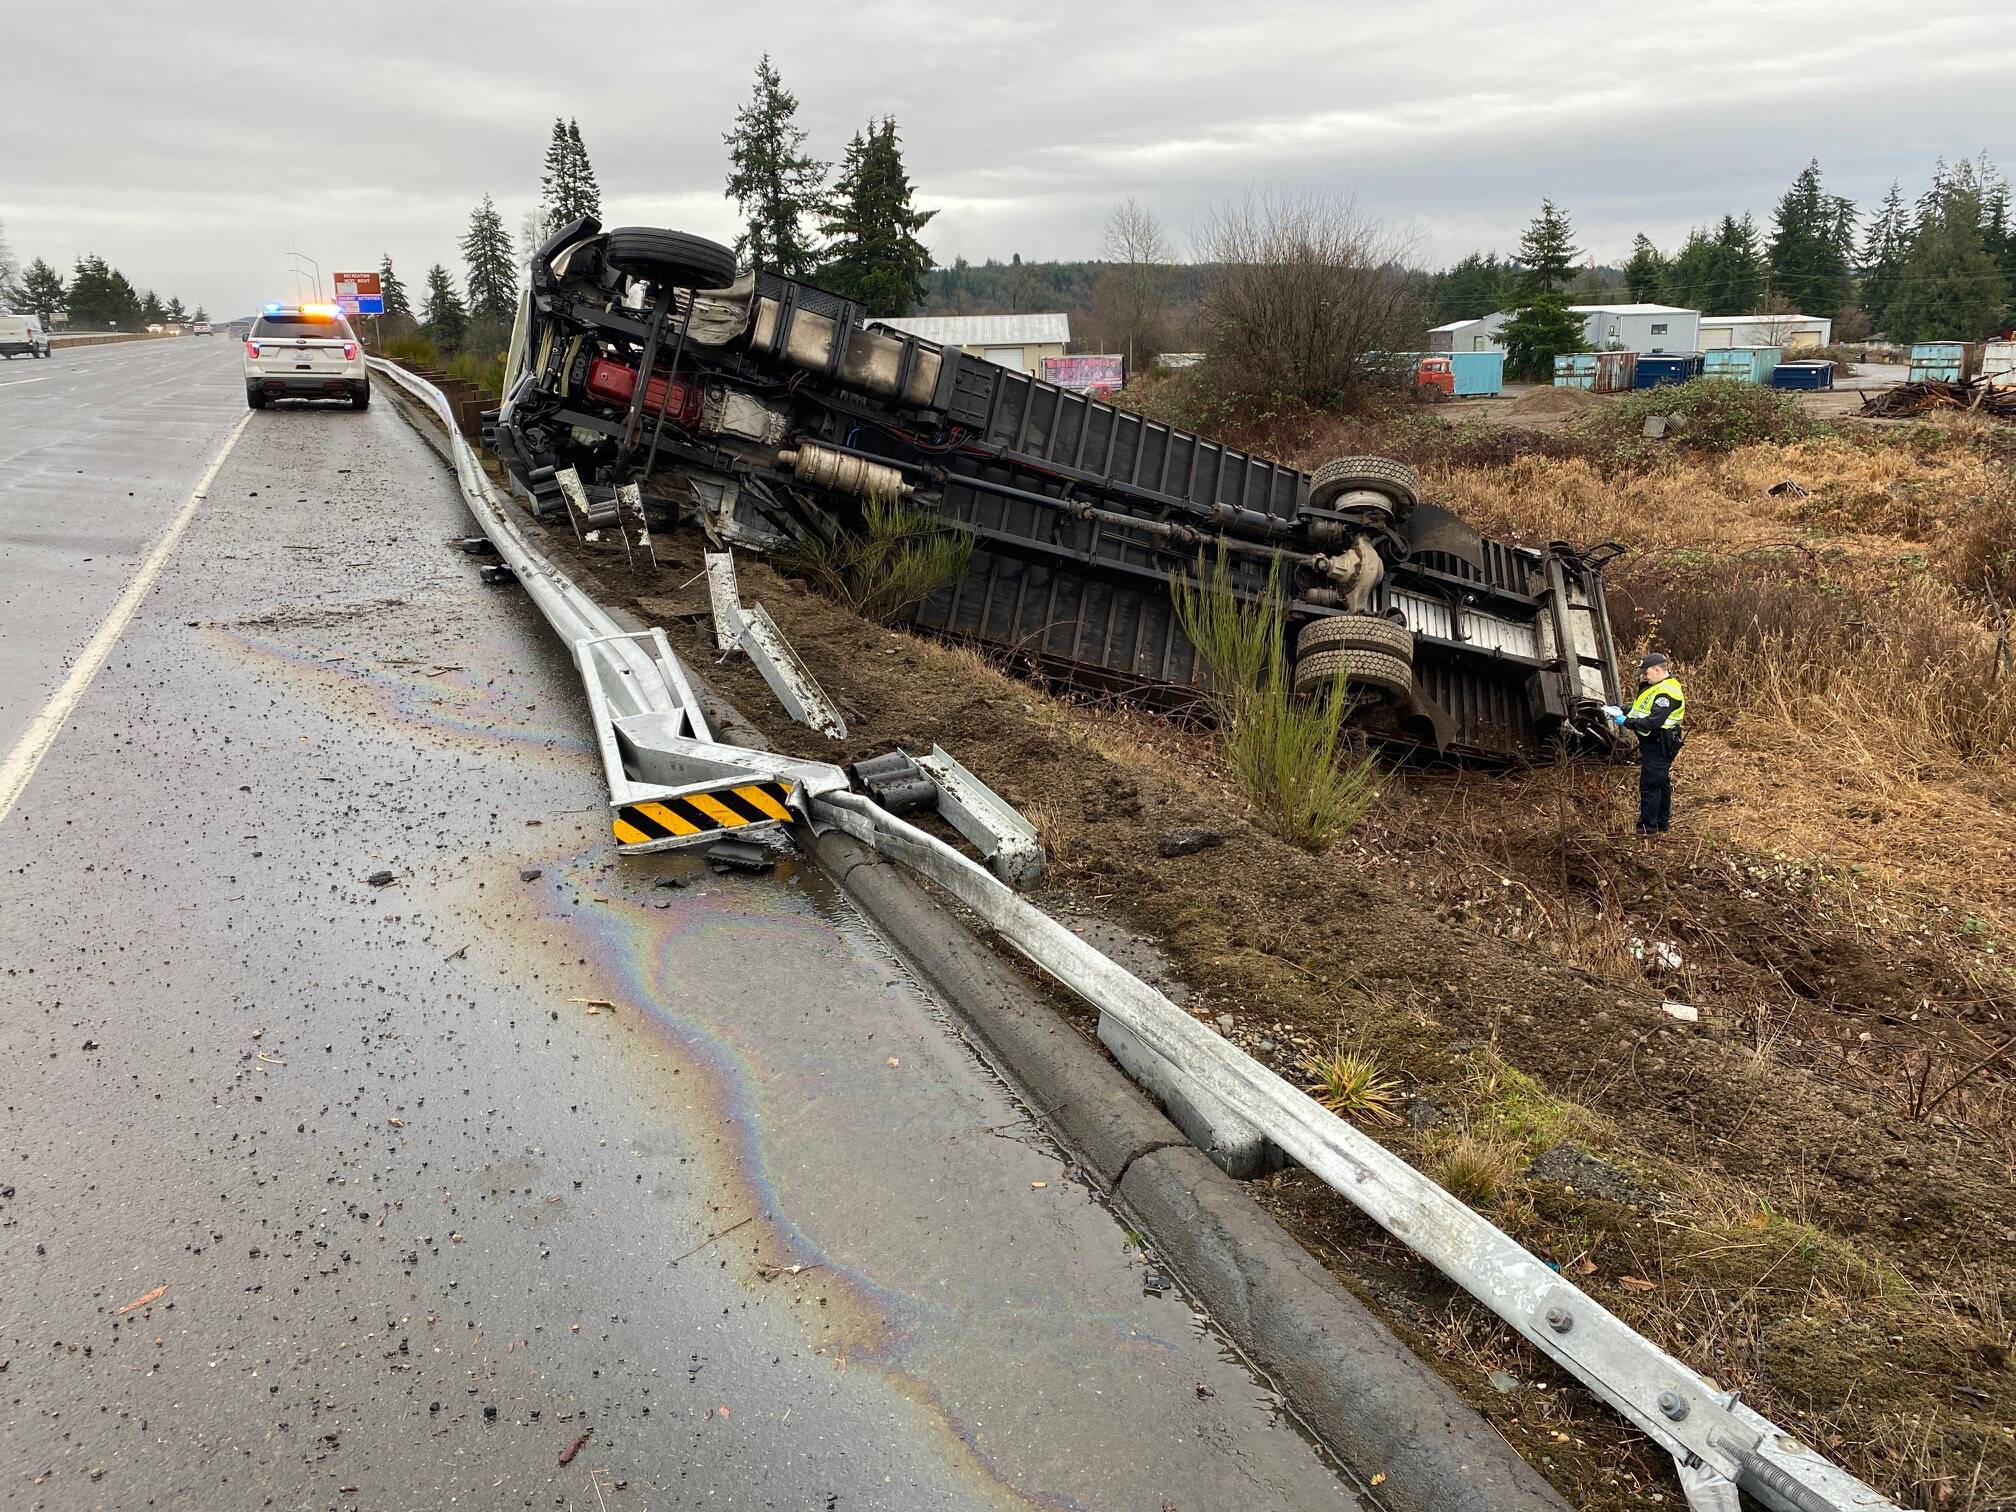 A 26-year-old man was arrested for driving under the influence after driving off the road in a 30-foot cargo truck on Highway 12 on Thursday, Jan. 12. (Courtesy photo / Washington State Patrol)